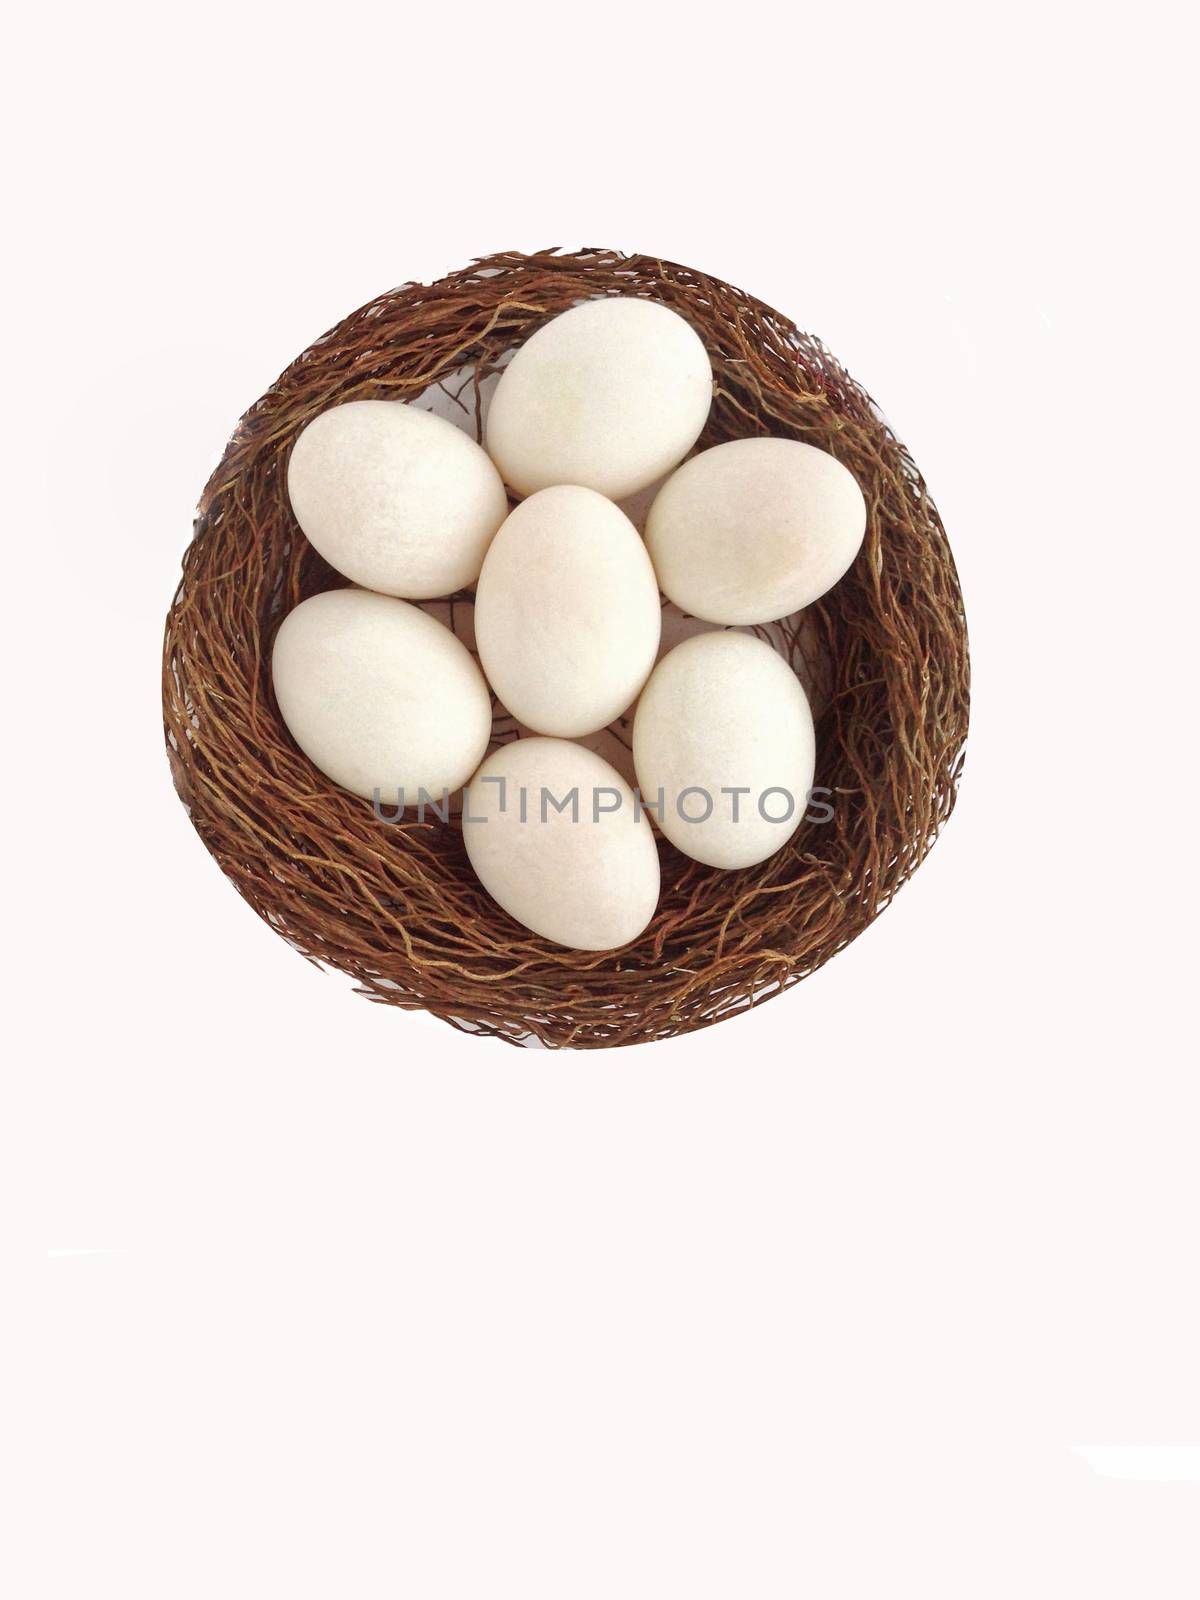 Duck egg on nest made from banyan tree air root with white background